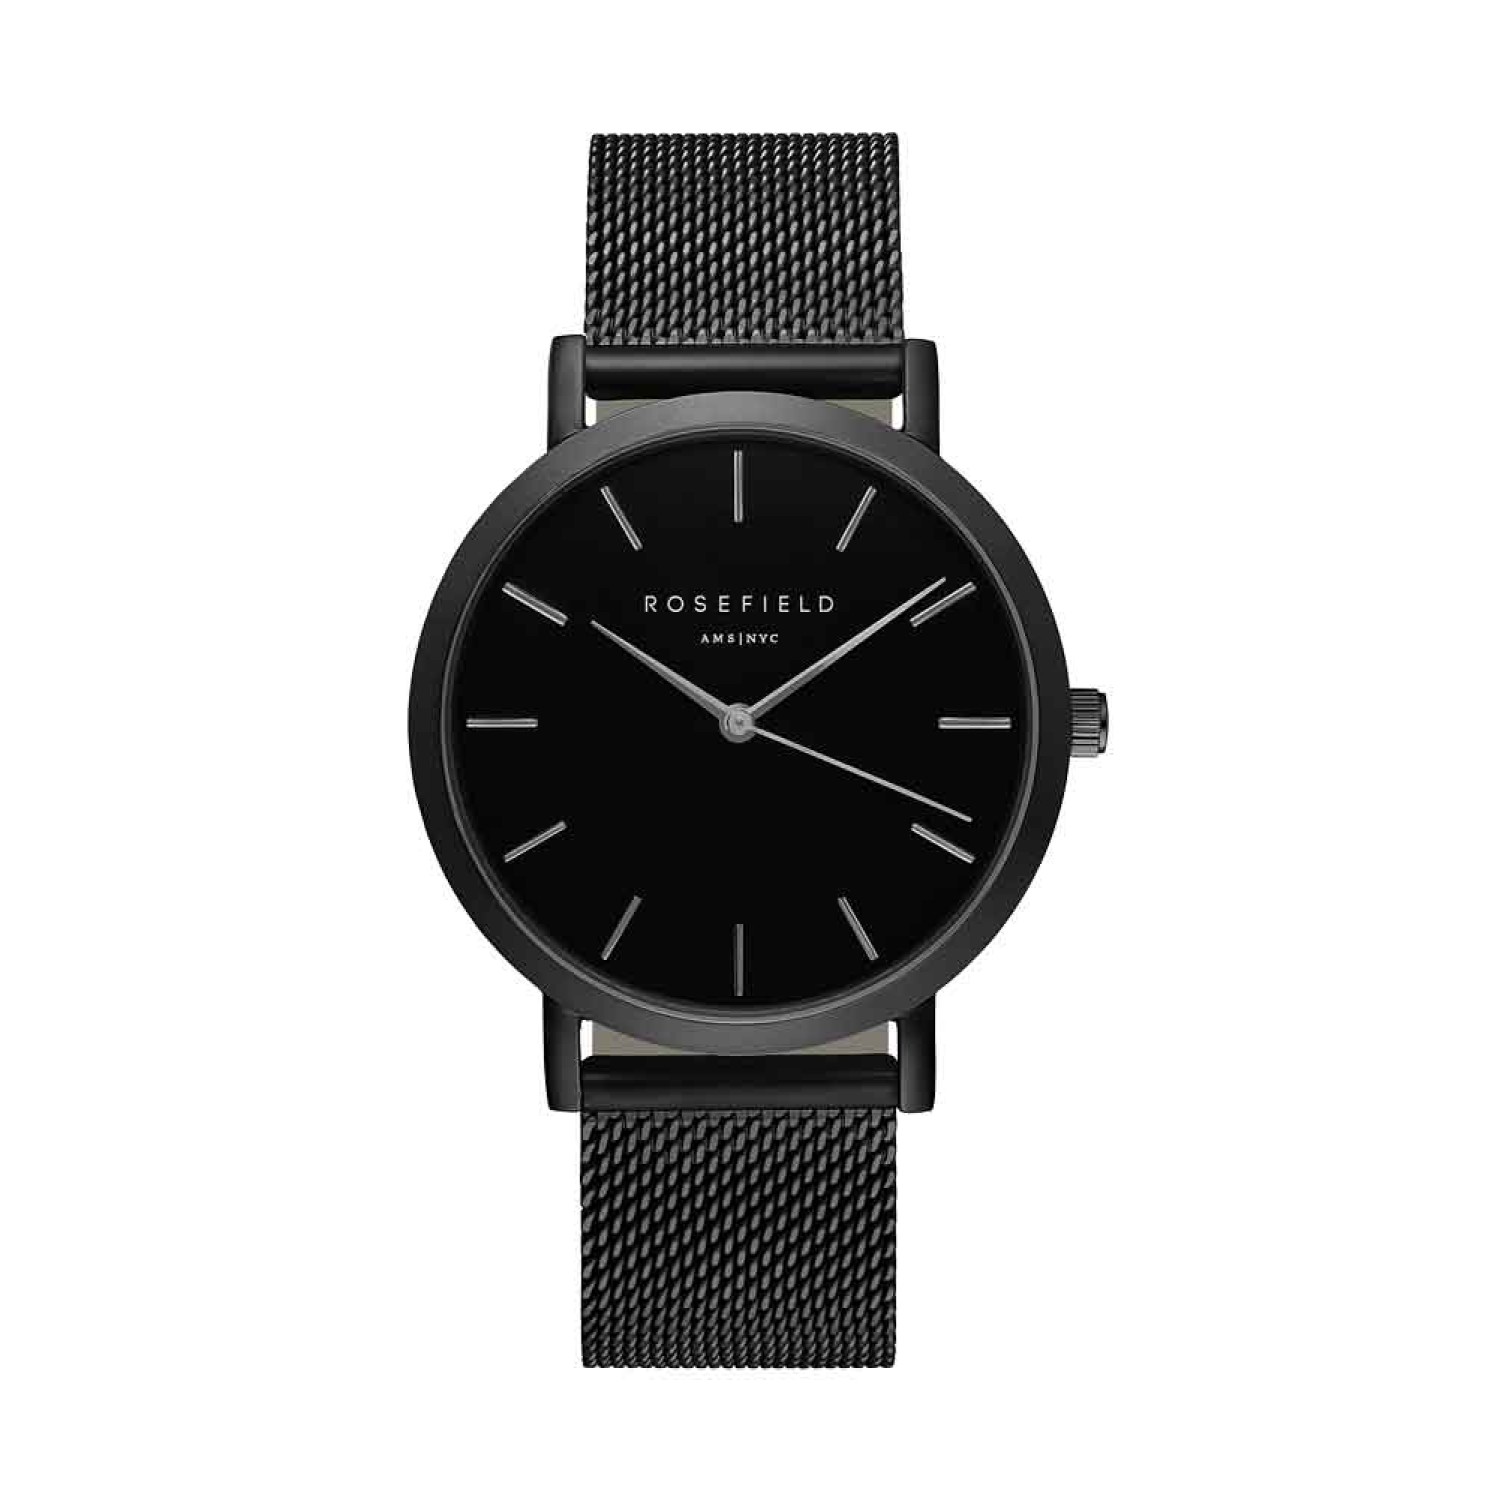 MBB-M43 Rosefield Black The Mercer Mesh Watch. The Mercer: Paying tribute to an exciting street in one of NYC’s signature shopping destinations, the MERCER collection features stainless steel mesh straps for an exquisite look that suits this fashionable n